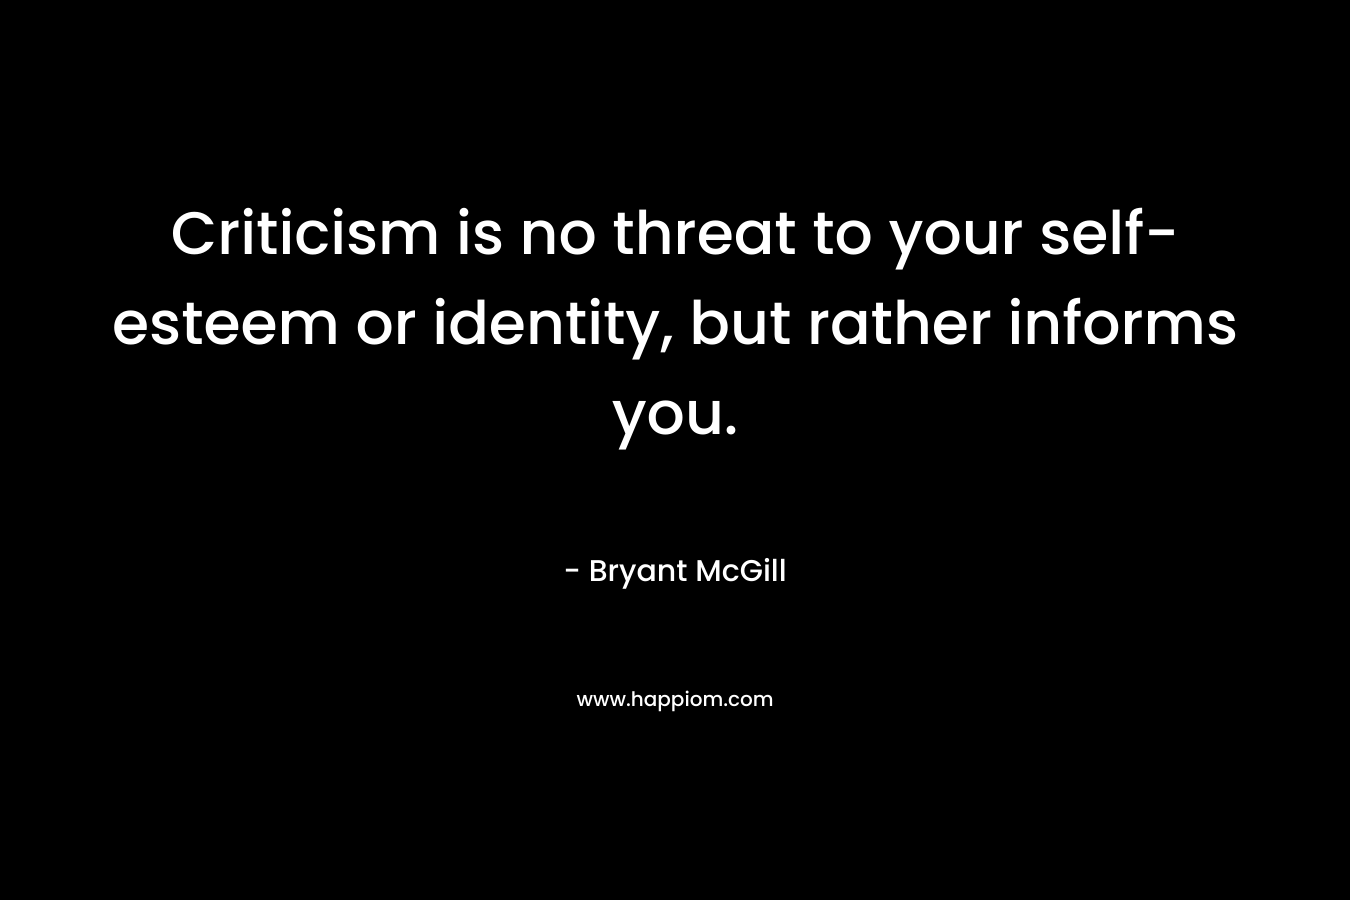 Criticism is no threat to your self-esteem or identity, but rather informs you.